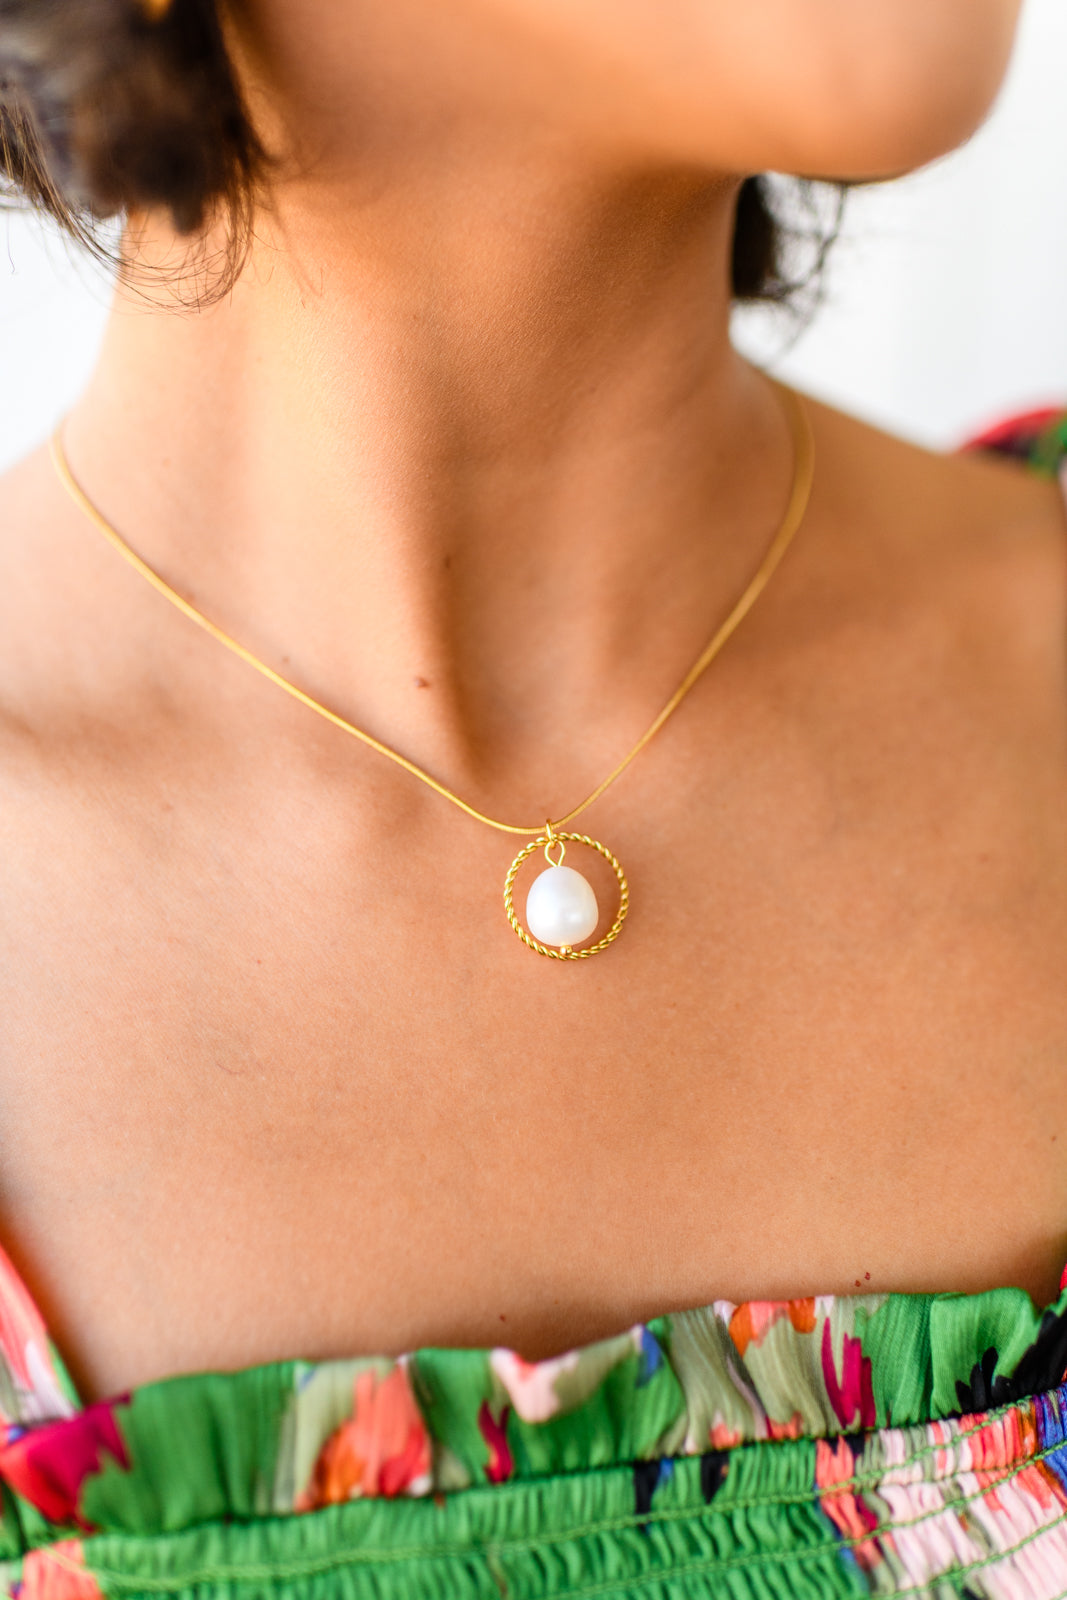 Feel captivated by this timeless Center of the World Pearl Pendant Necklace, crafted with 18k gold-plated stainless steel. Showcasing a free-hanging pearl, this necklace creates an elegant and sophisticated look that will never go out of style. Are you ready to make a lasting impression?